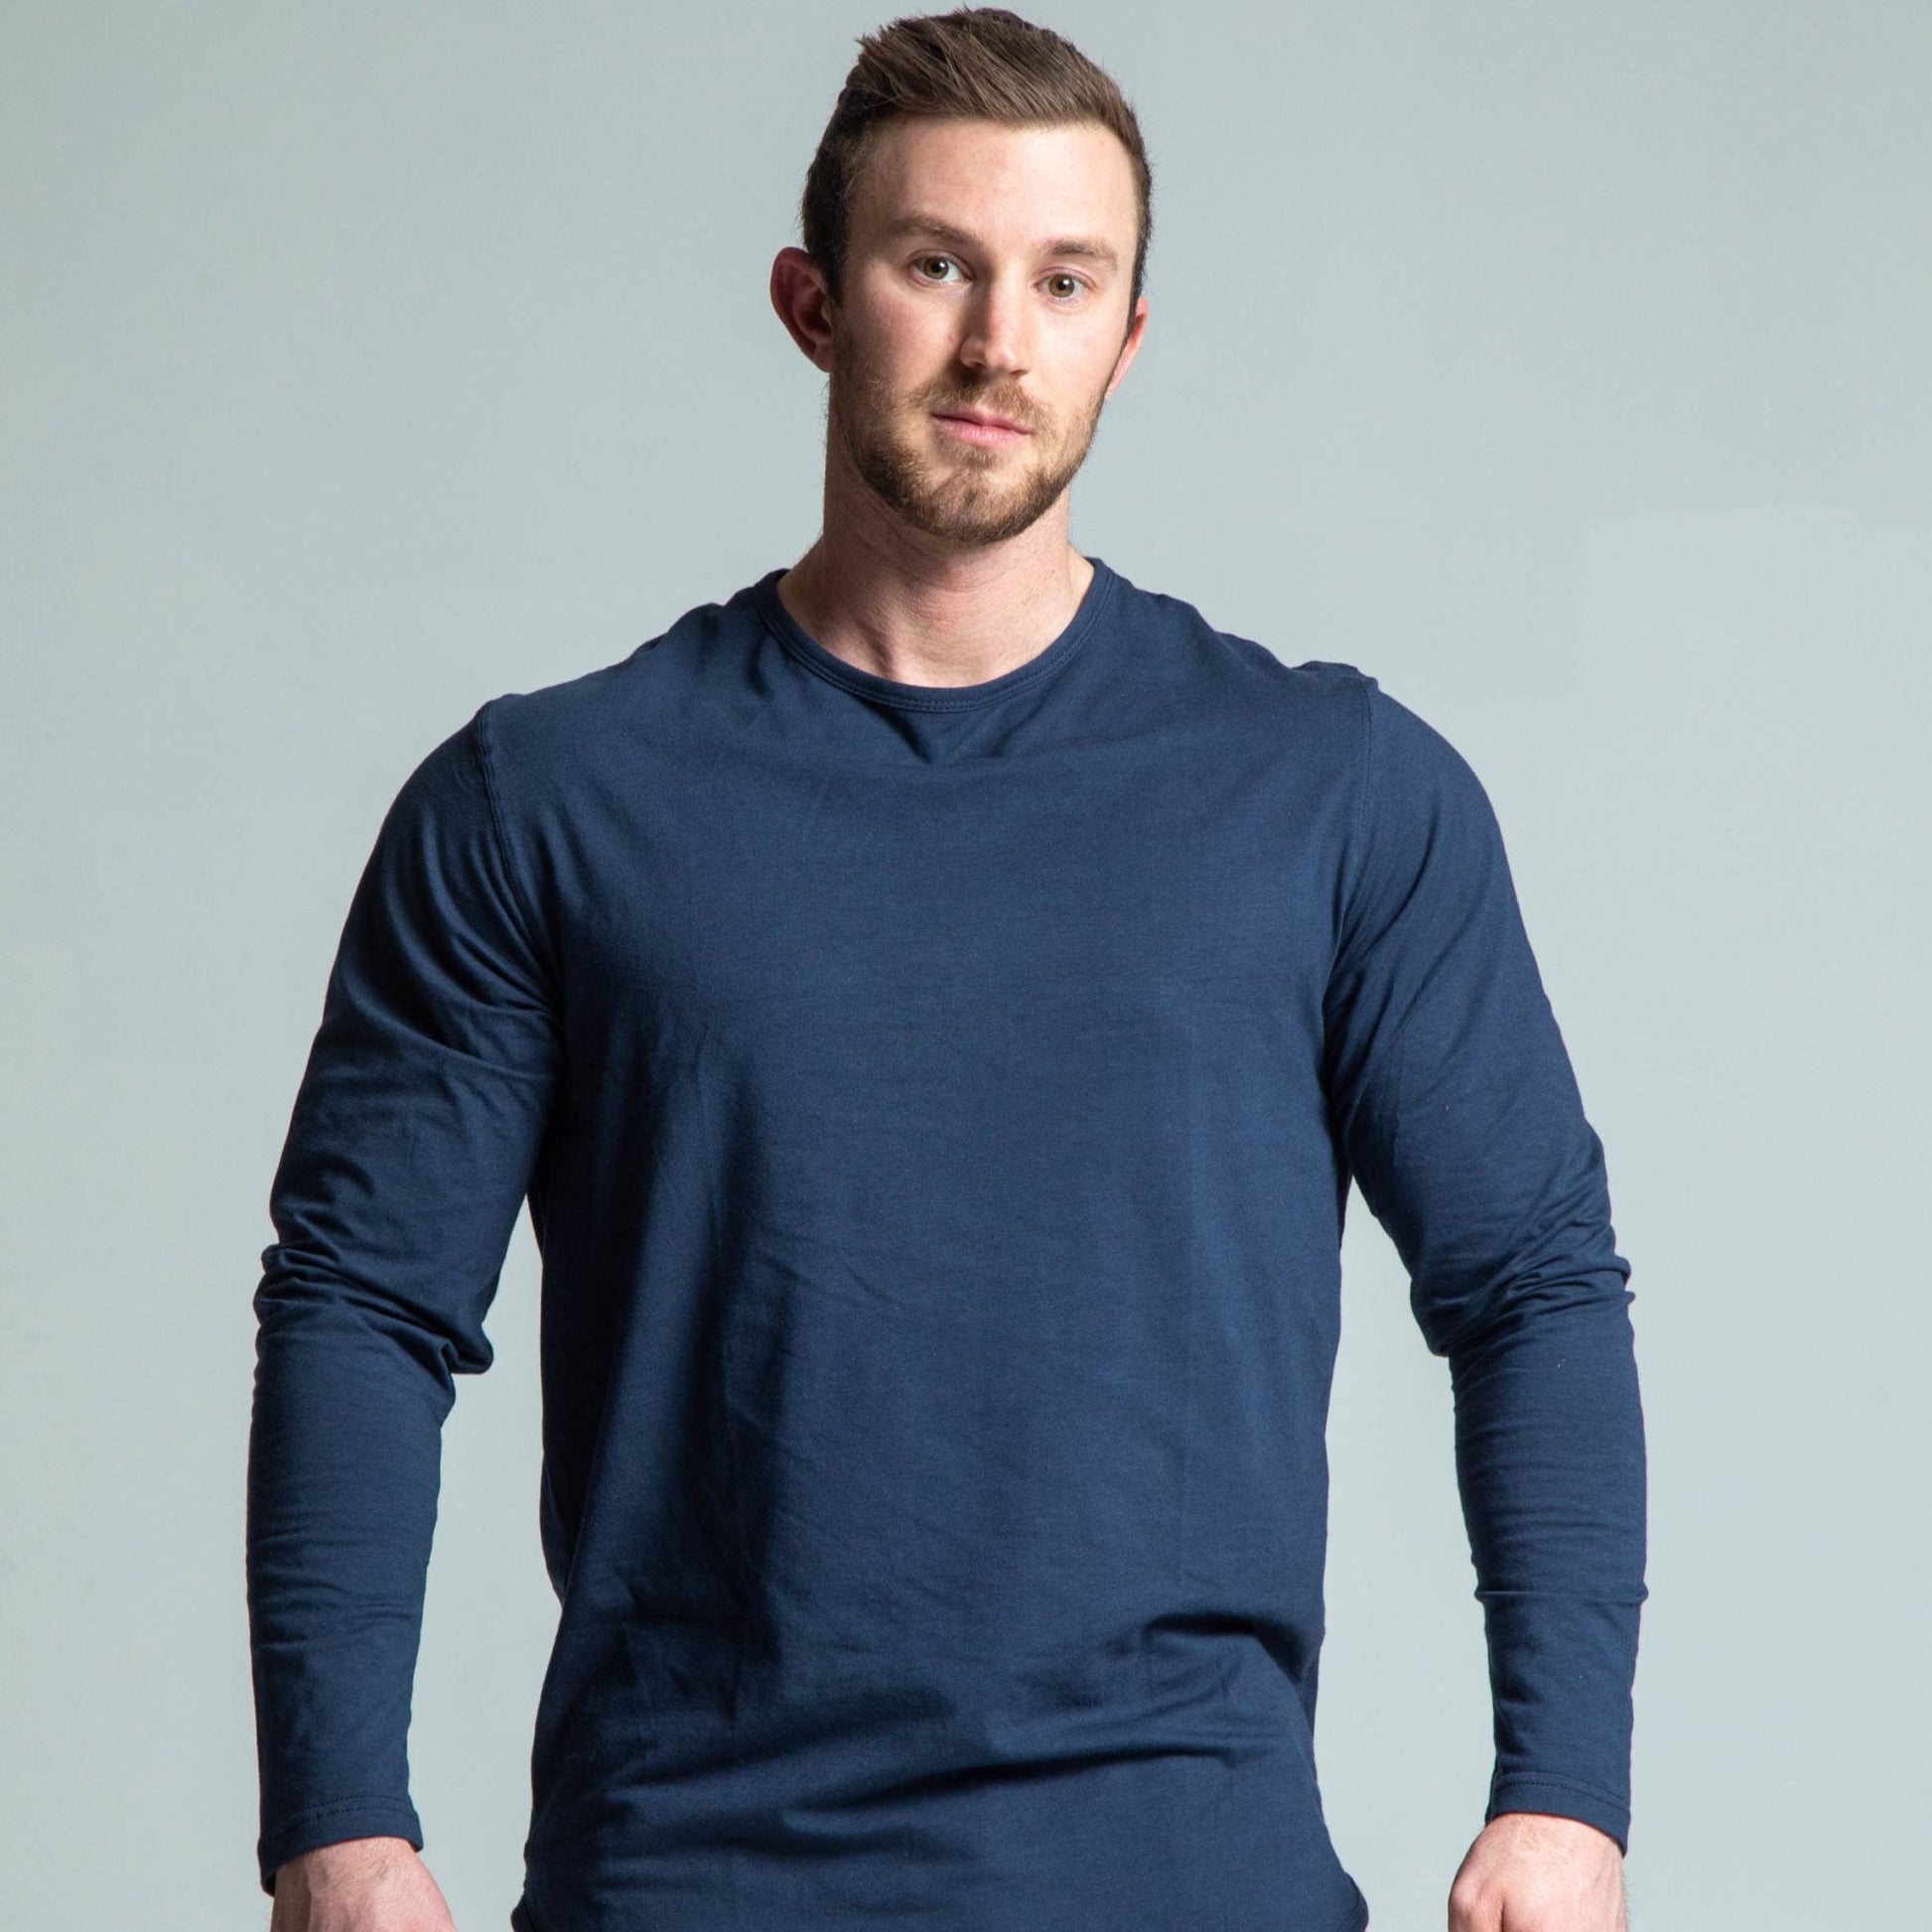 Front view of man wearing navy long sleeve tee